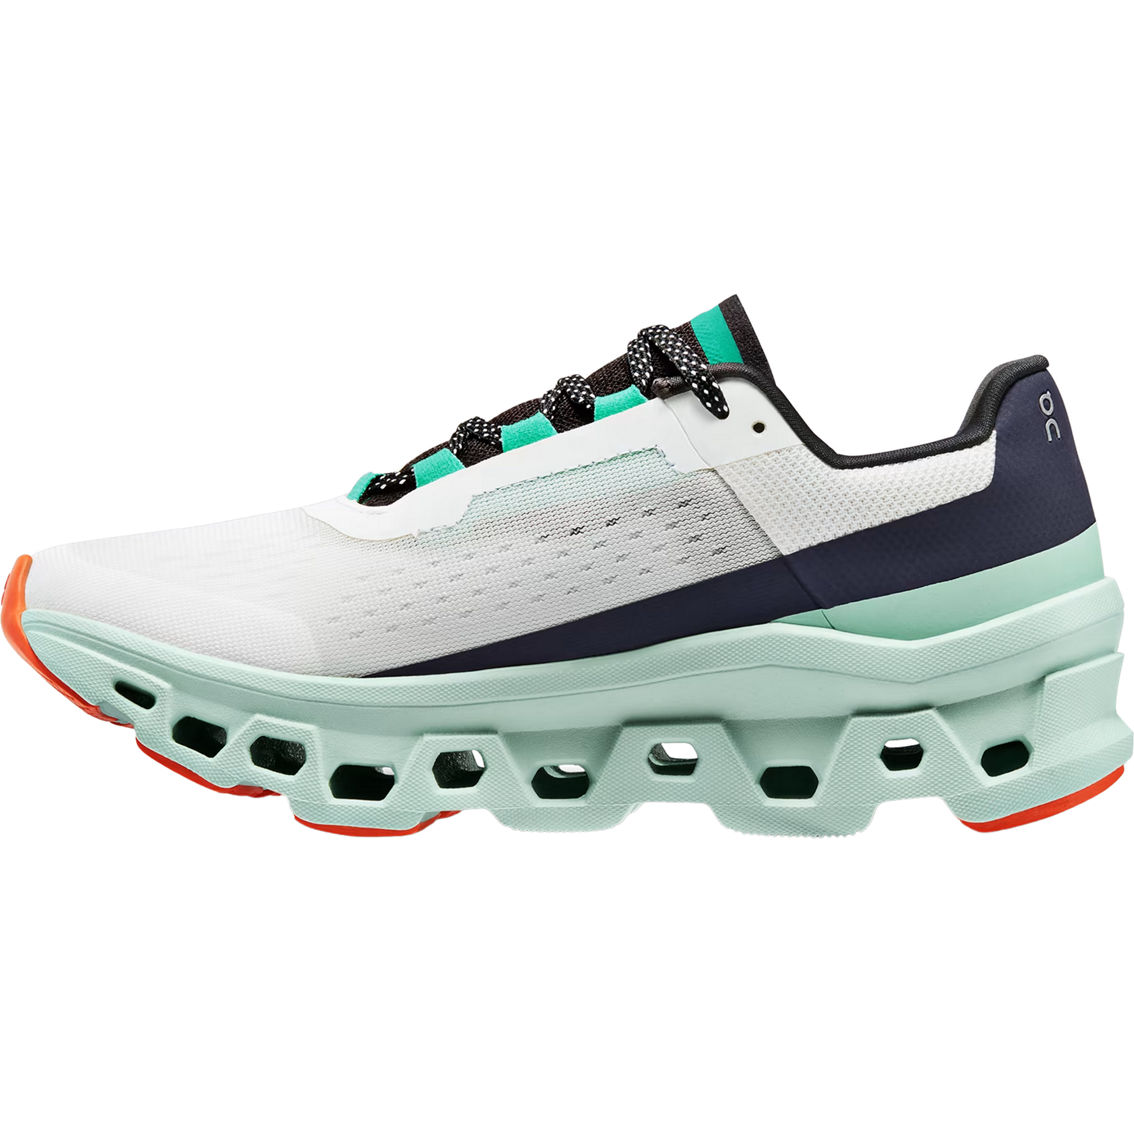 On Women's Cloudmonster Running Shoes - Image 3 of 6